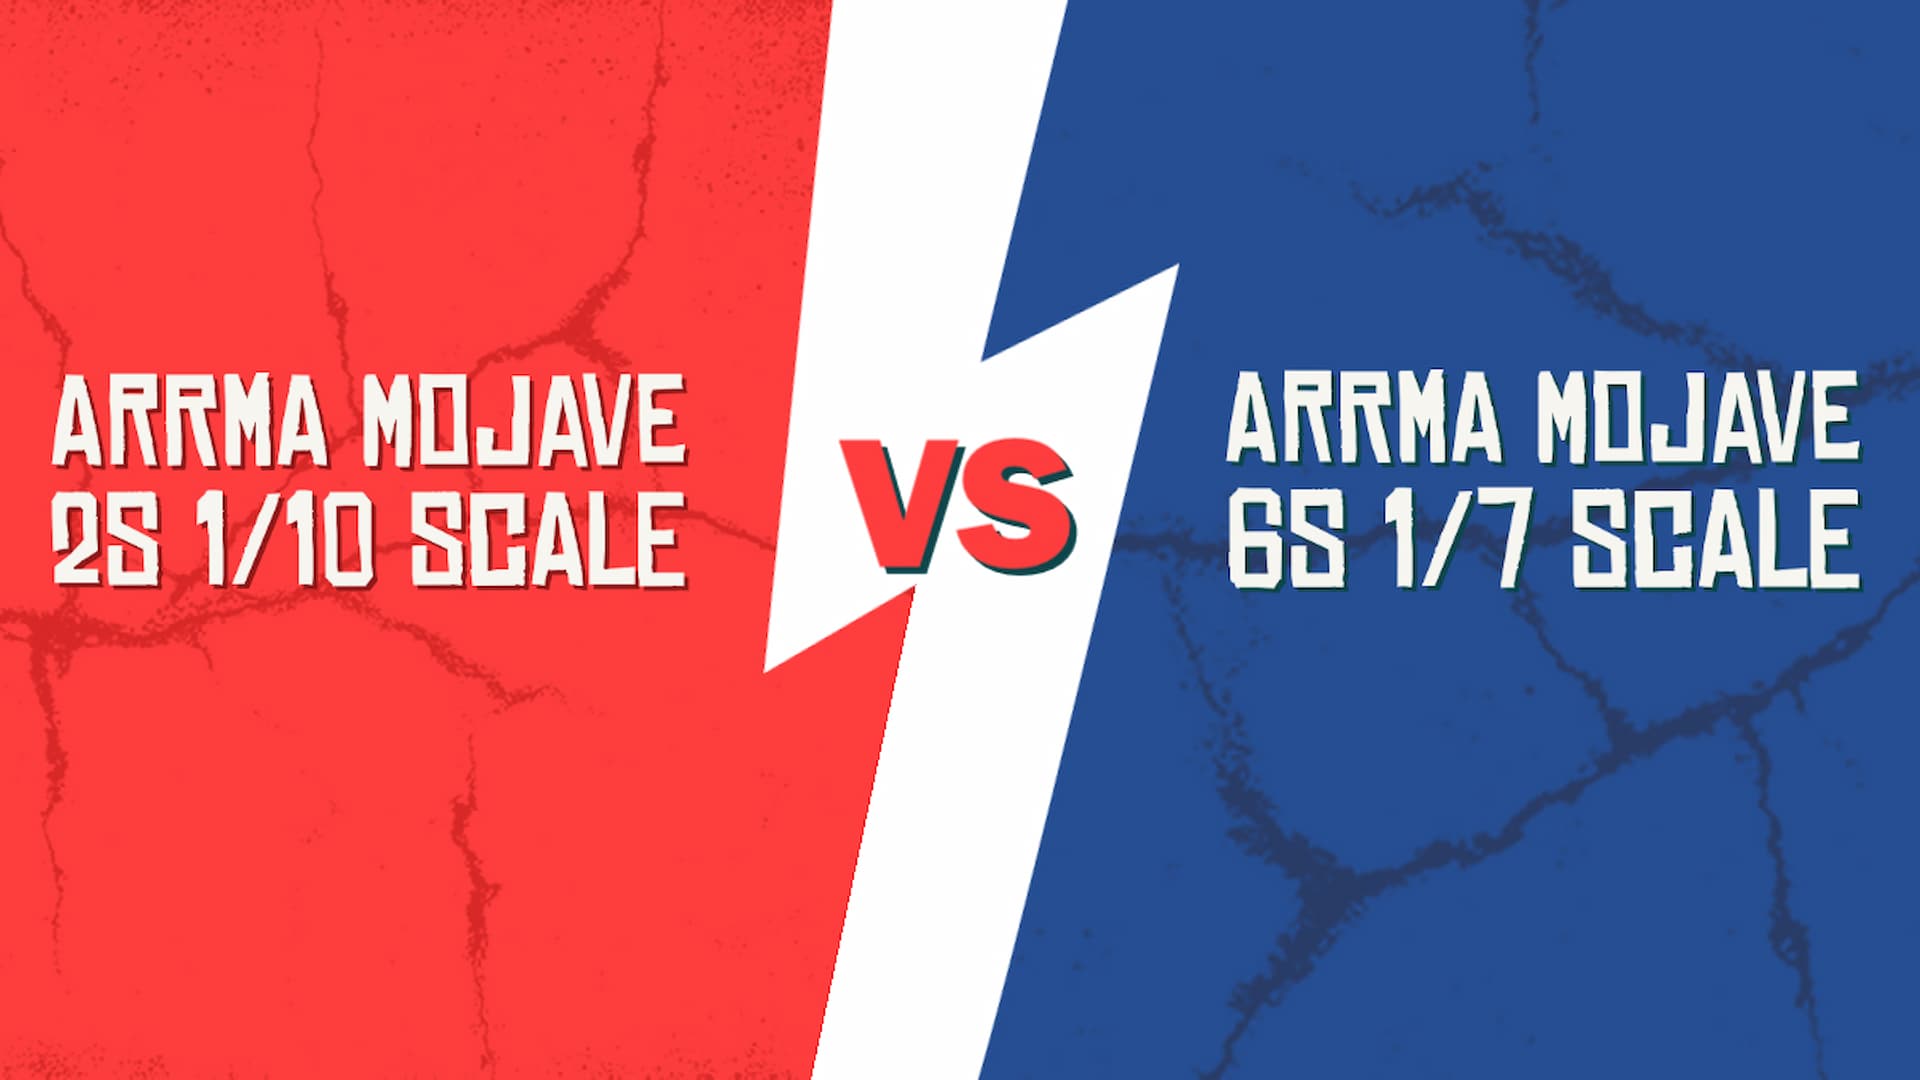 graphic showing what scale is the arrma mojave